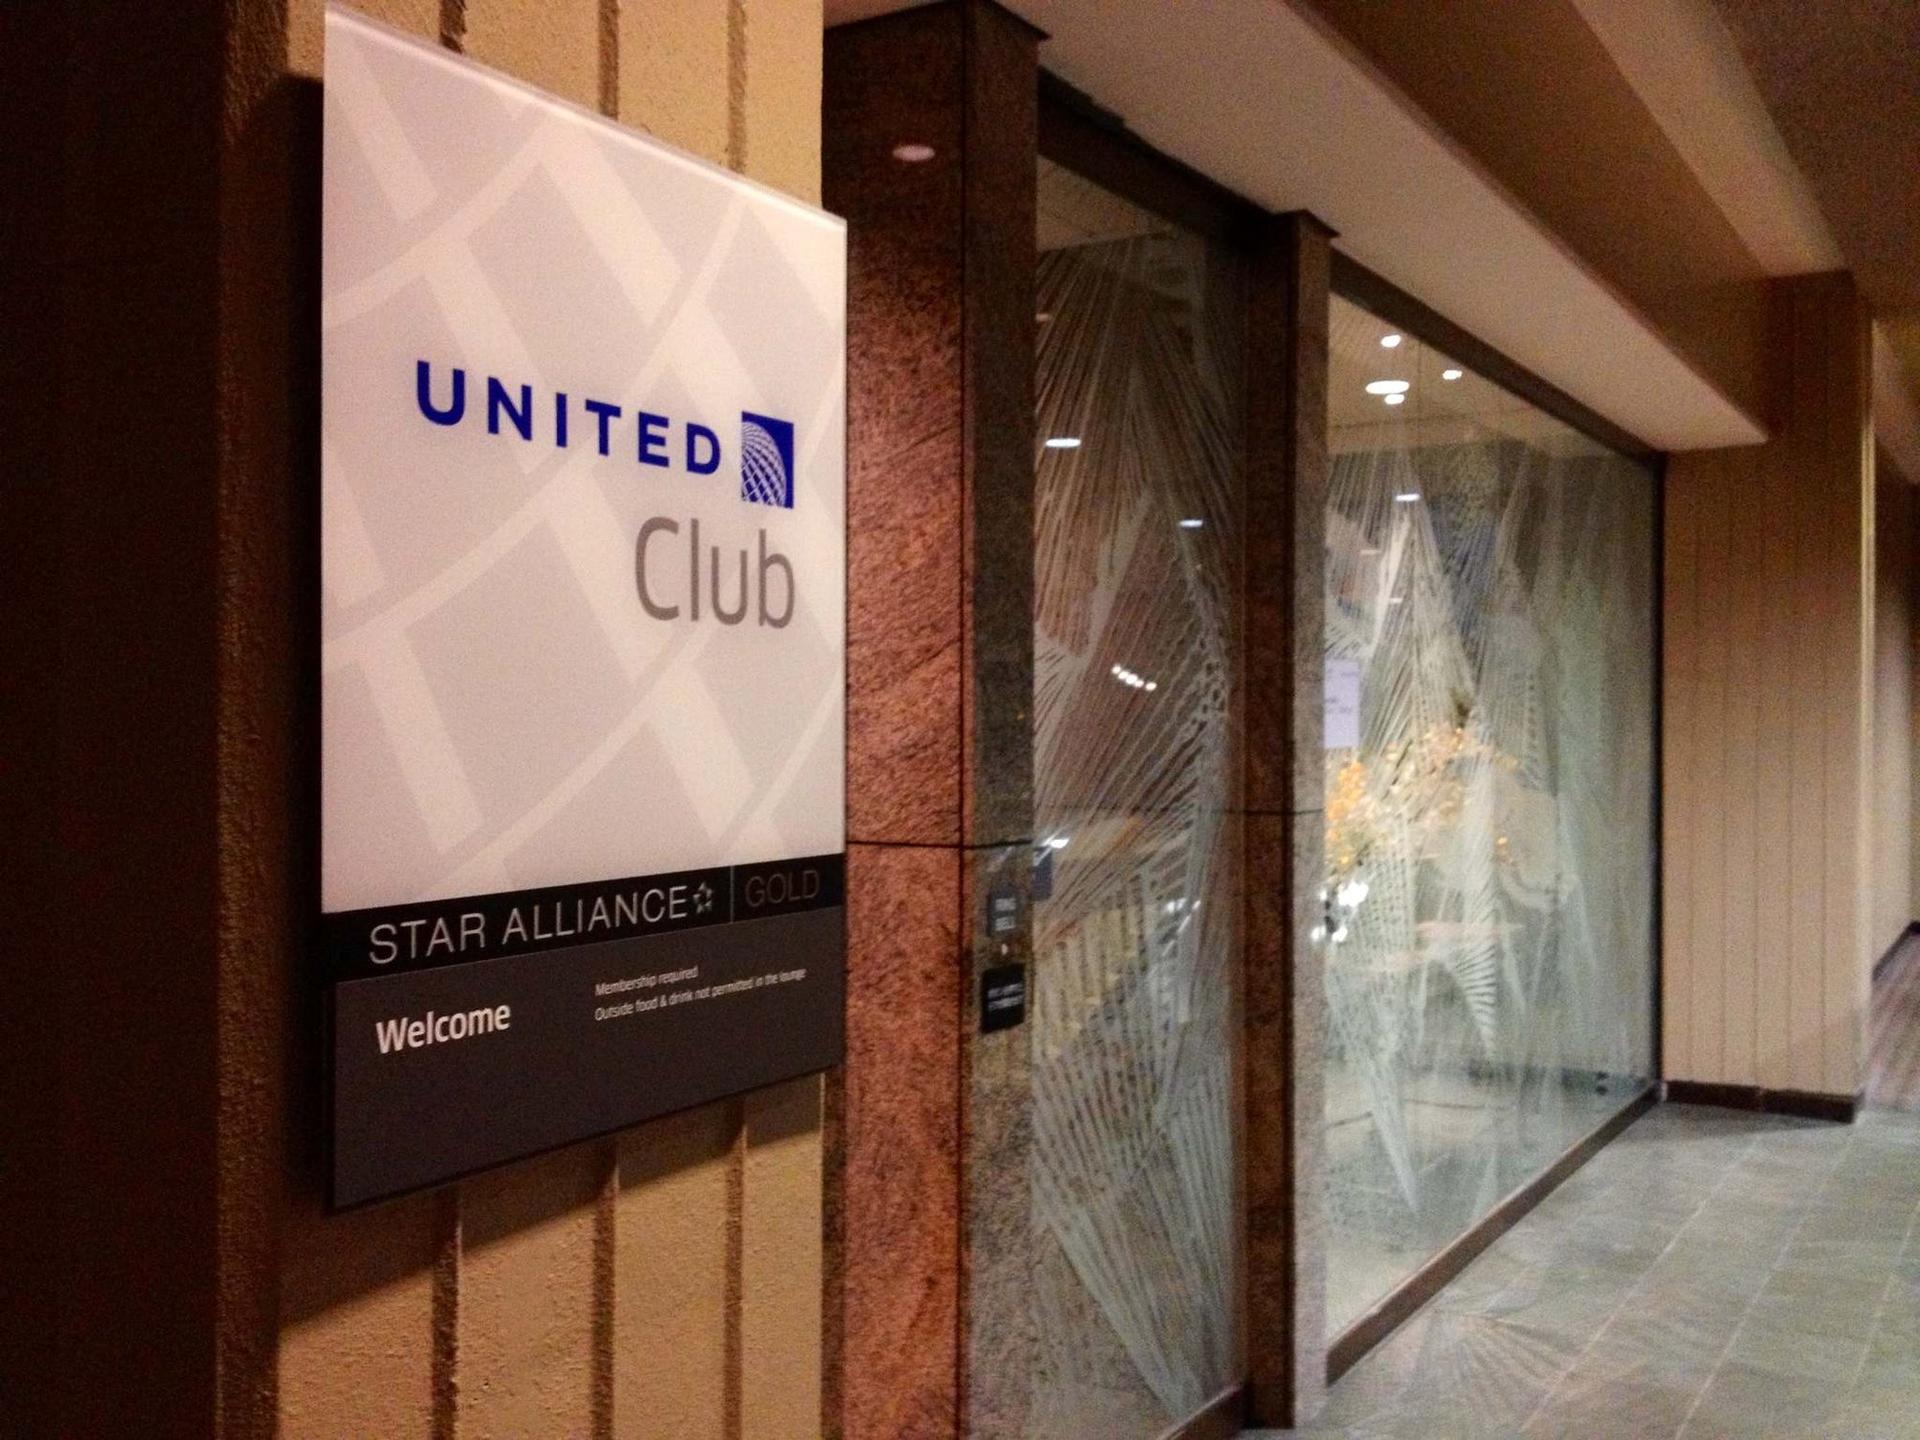 United Airlines United Club image 35 of 37